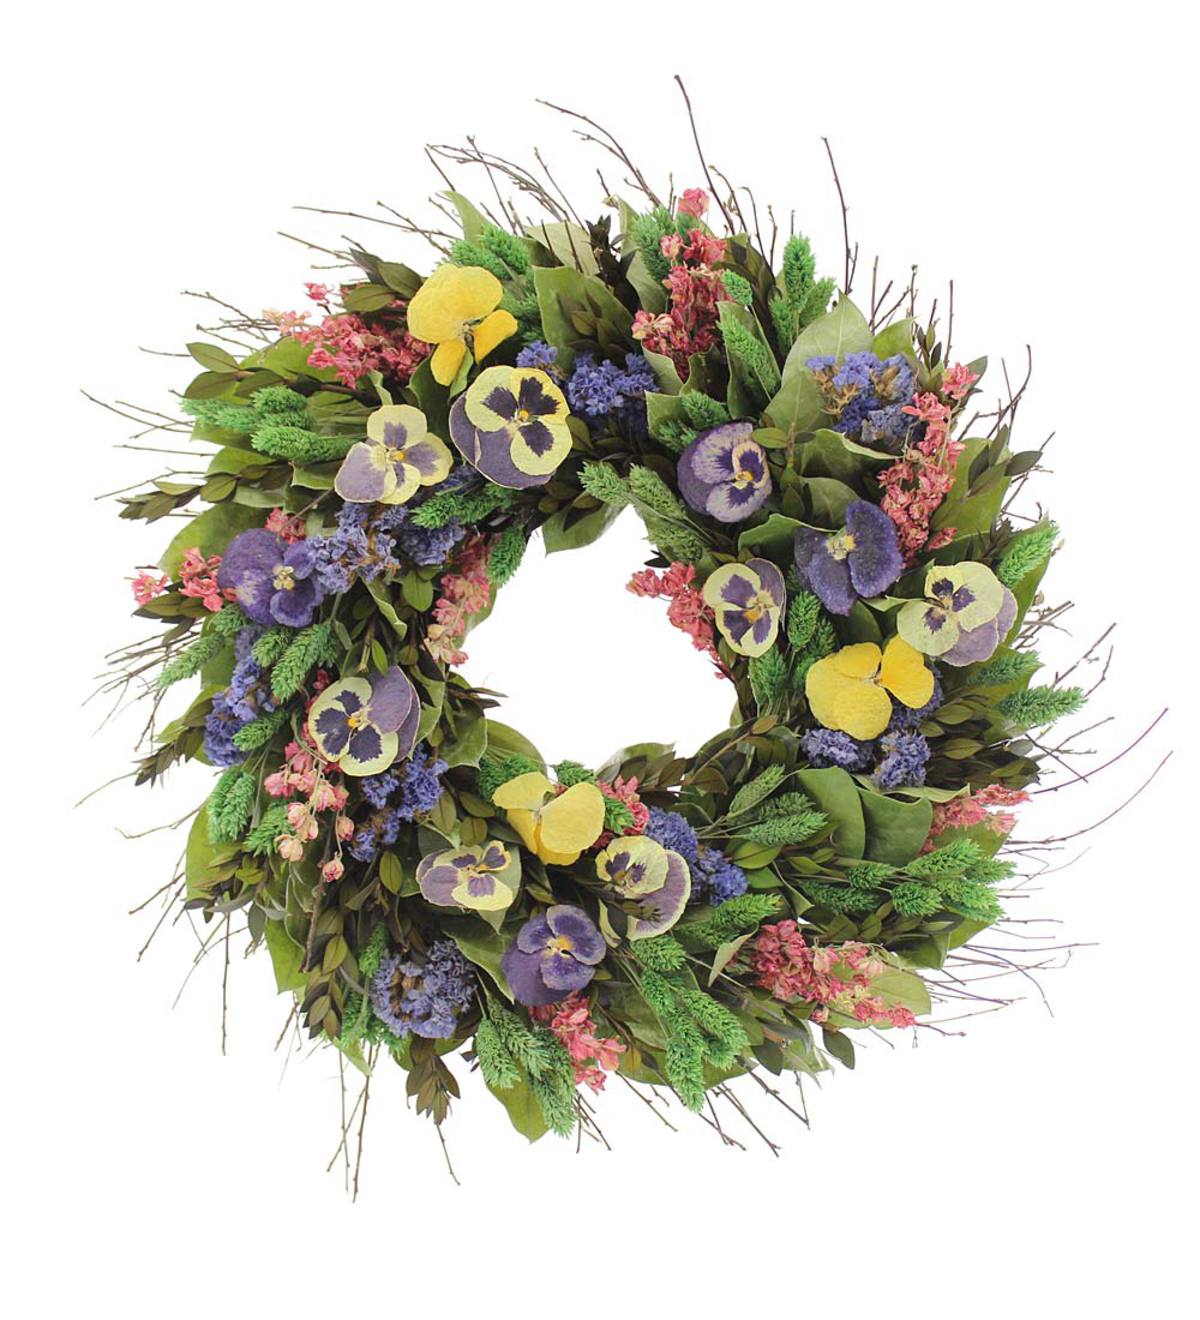 Pansy and Larkspur Wreath, 22